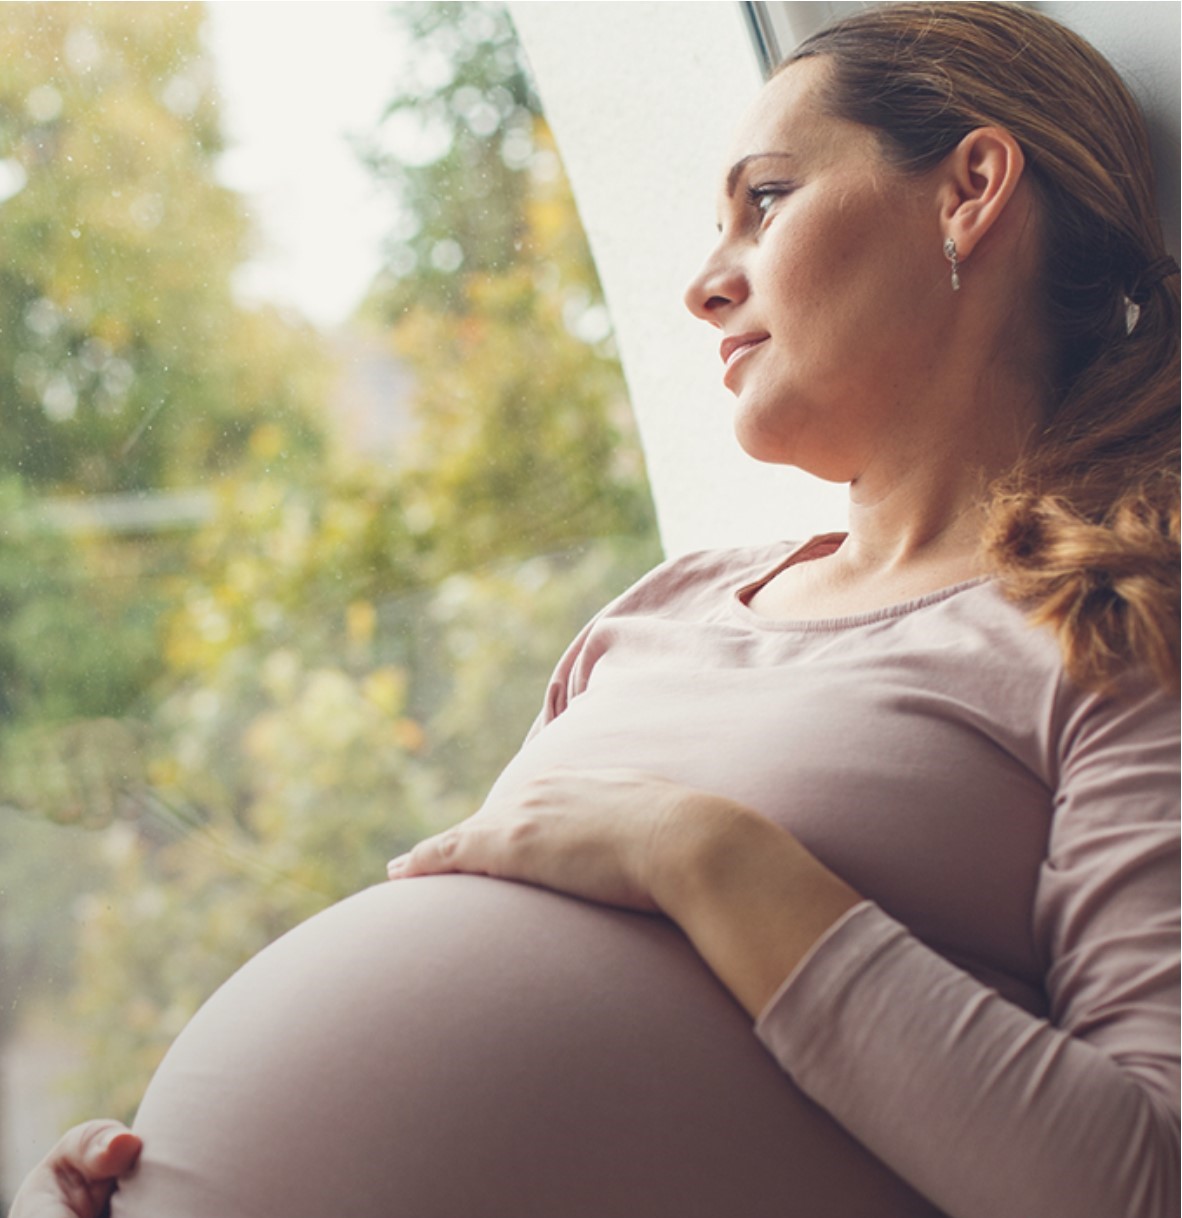 Pregnant woman looking out the window holding her belly